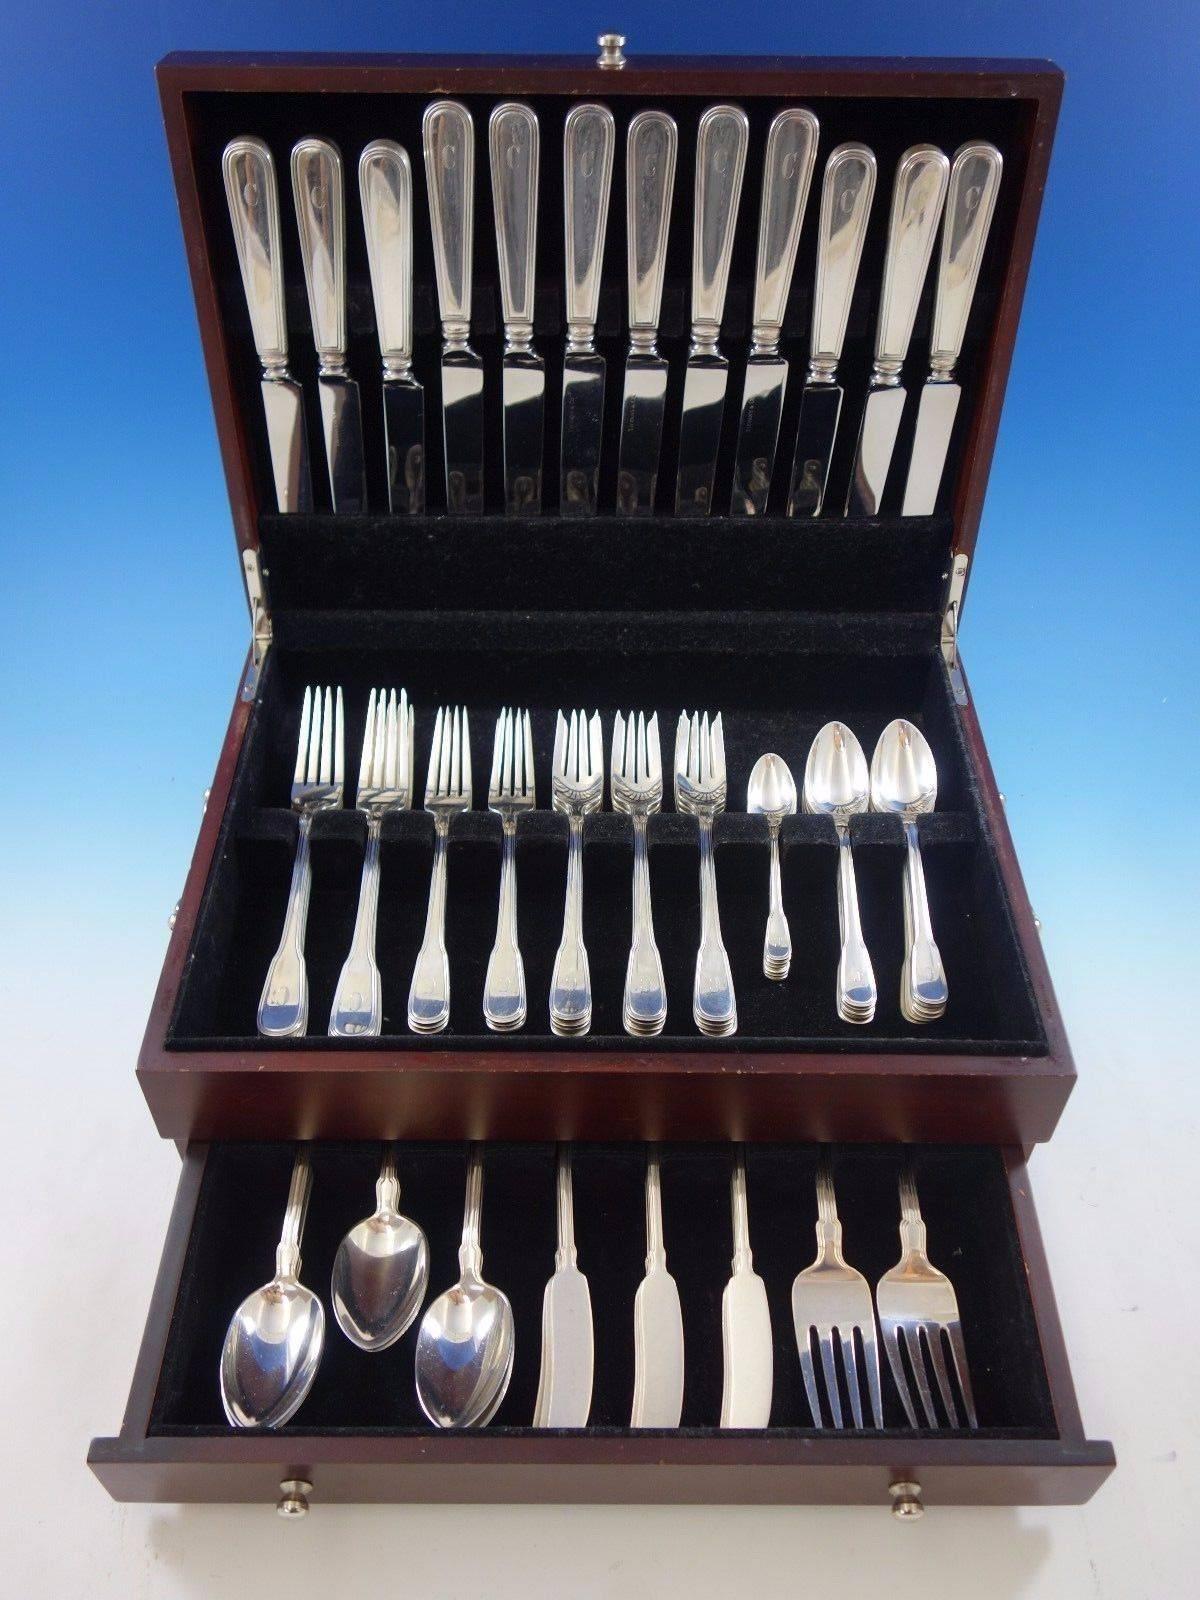 Hamilton aka Gramercy by Tiffany and Co sterling silver flatware set, 80 pieces. This set includes: 

Six dinner knives, 10